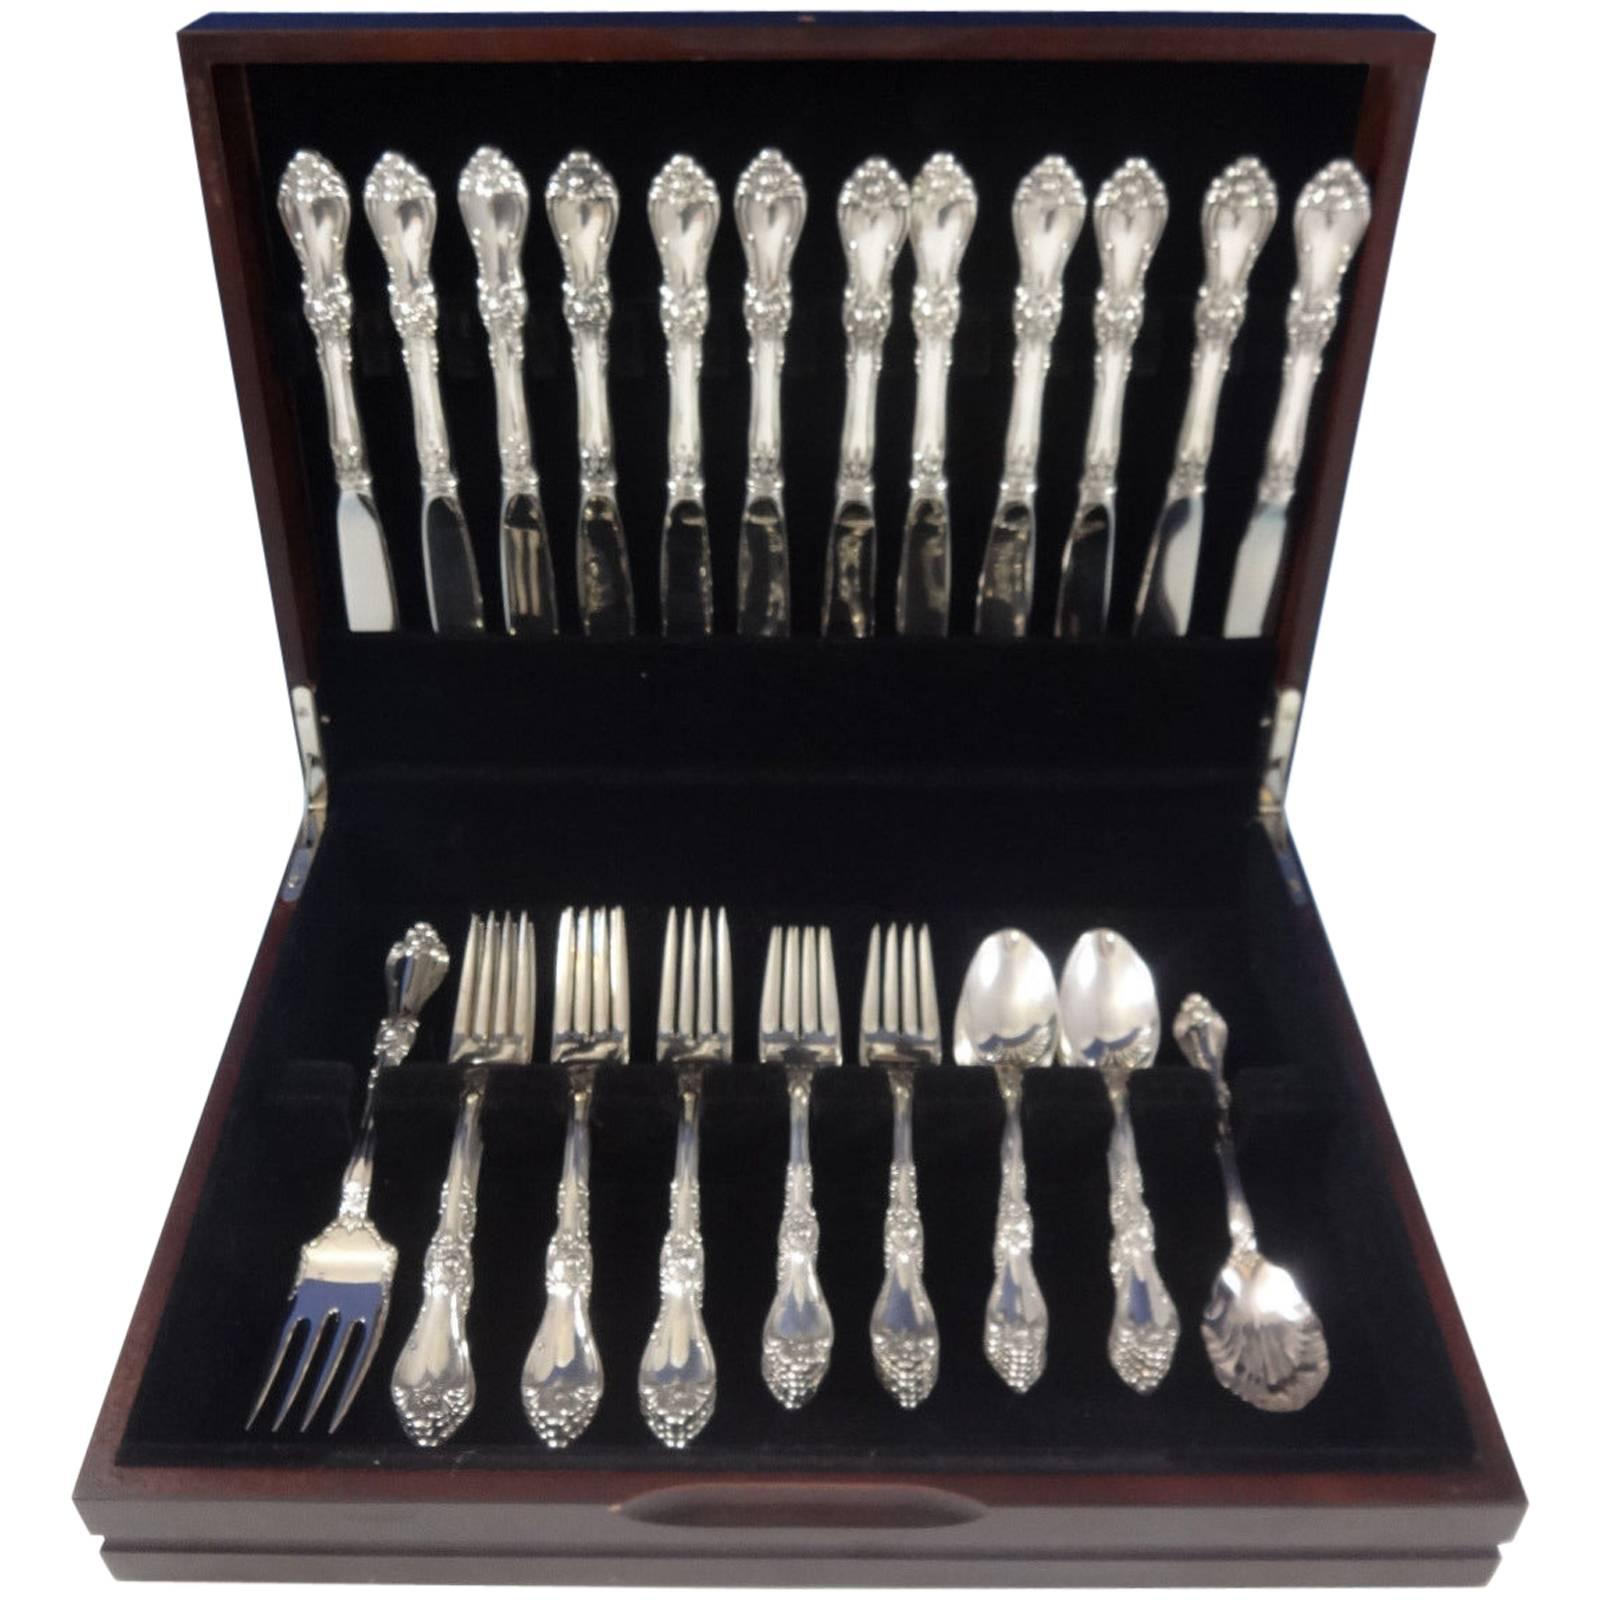 Beautiful Royal Rose by Wallace sterling silver flatware set, 50 pieces. This set includes: 

12 knives, 9